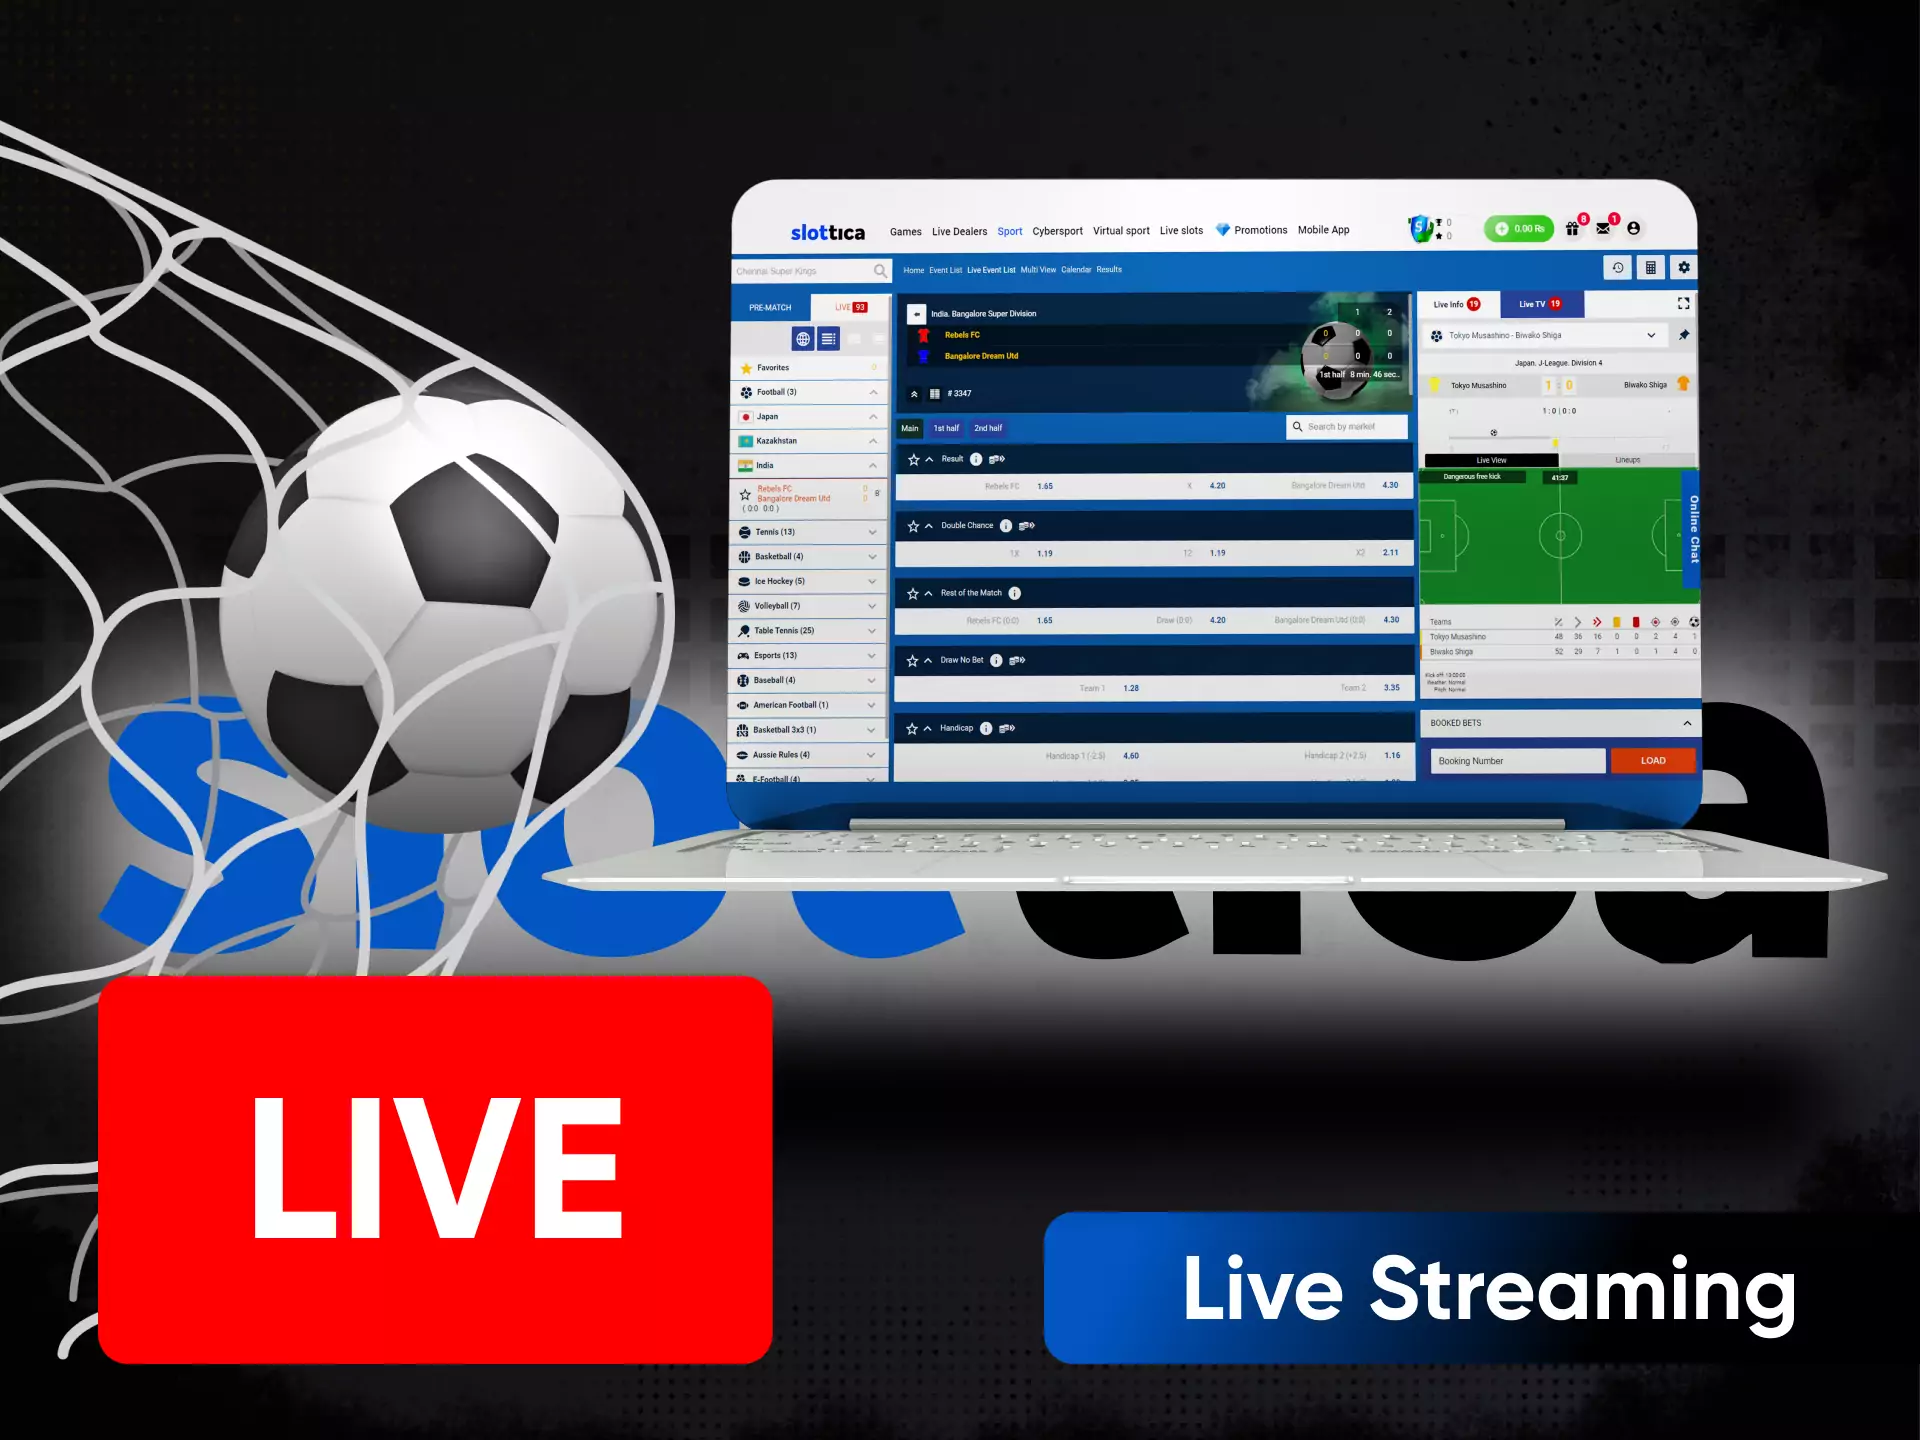 Follow the live matches right on the Slottica website.